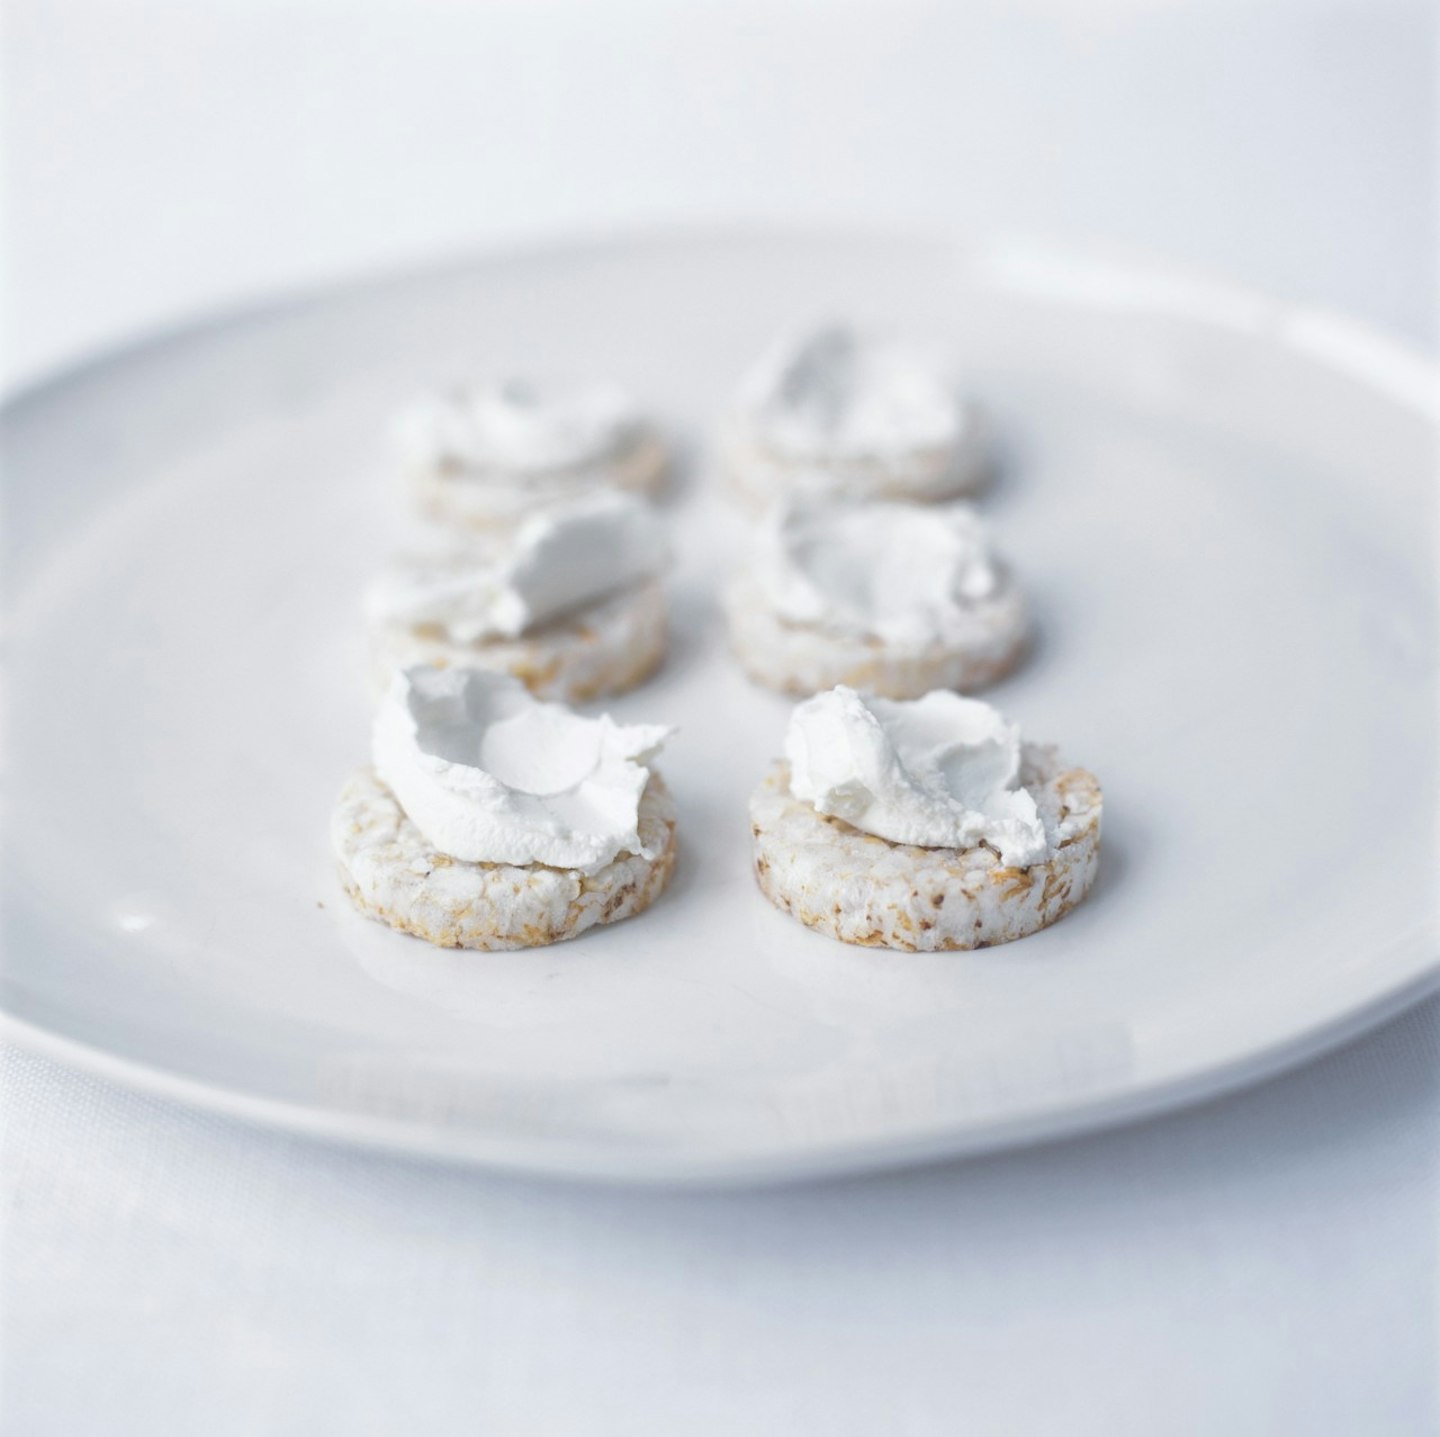 Either use mini rice cakes and put a small dollop of houmous on top, or larger ones and then break into small pieces. The houmous stops them from being too dry but you could also top with cream cheese. Plain rice cakes are an ideal snack when you’re out 